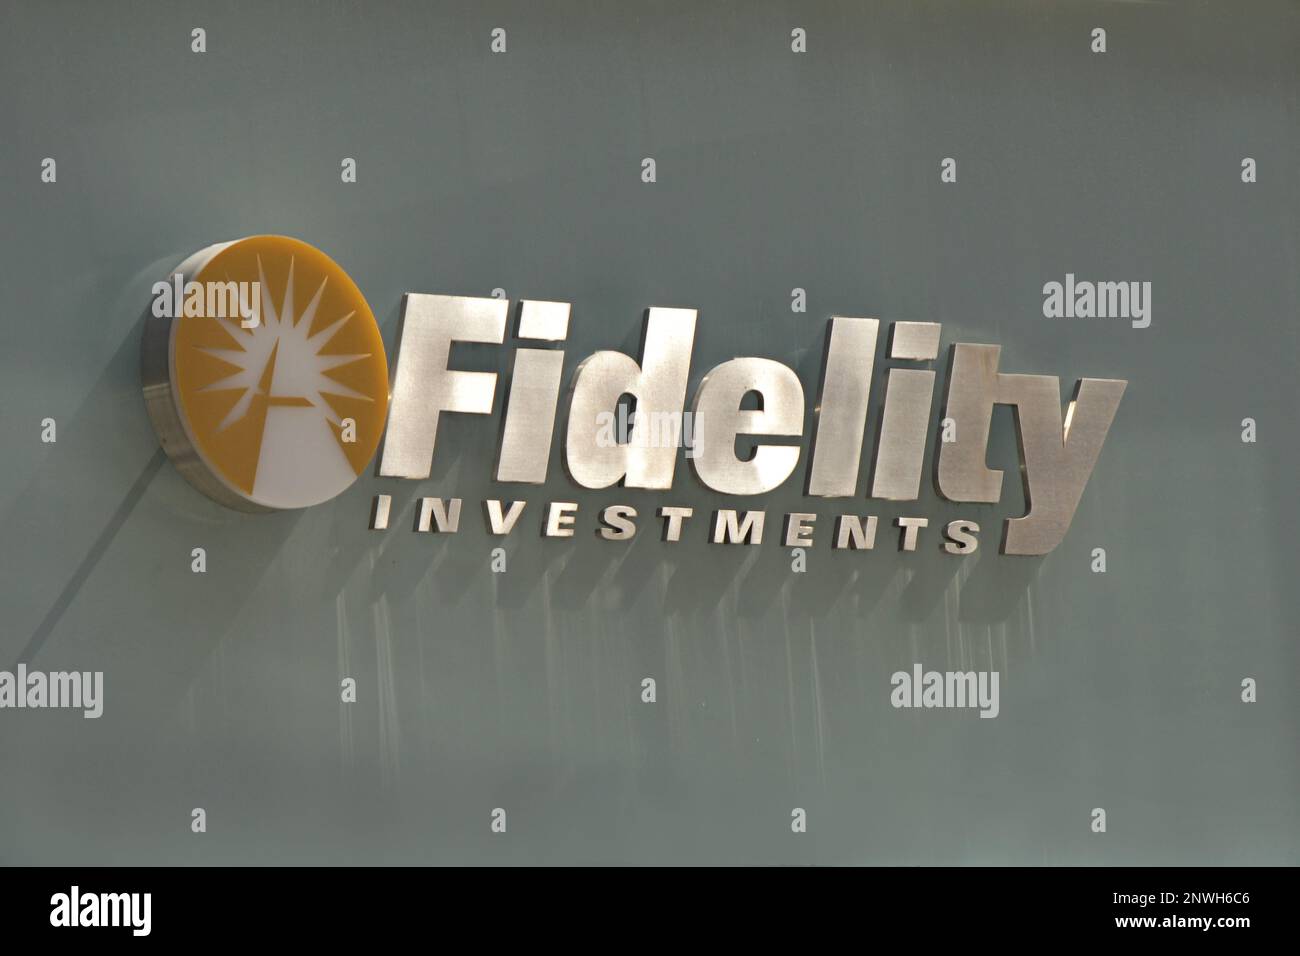 New York, NY - August 26, 2021: Shiny metal sign for Fidelity Investments with name and logo on office building in Midtown, Manhattan Stock Photo